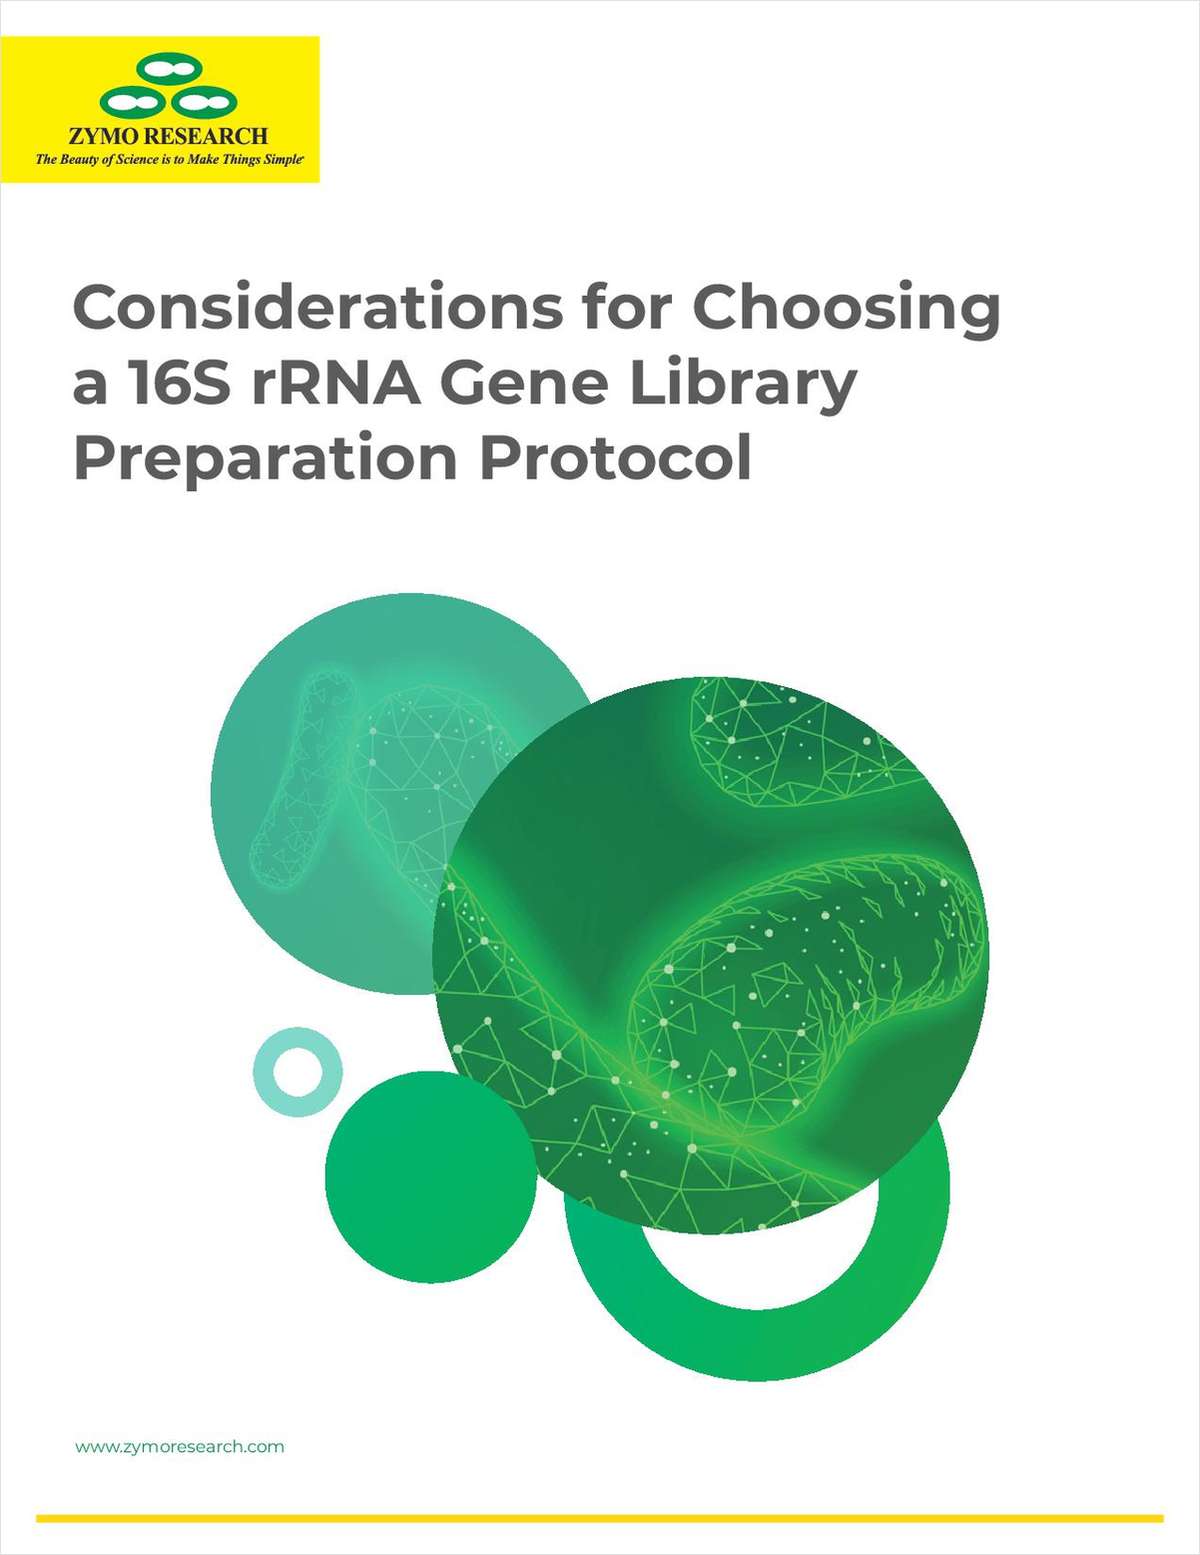 Considerations for Choosing a 16S rRNA Gene Library Preparation Protocol